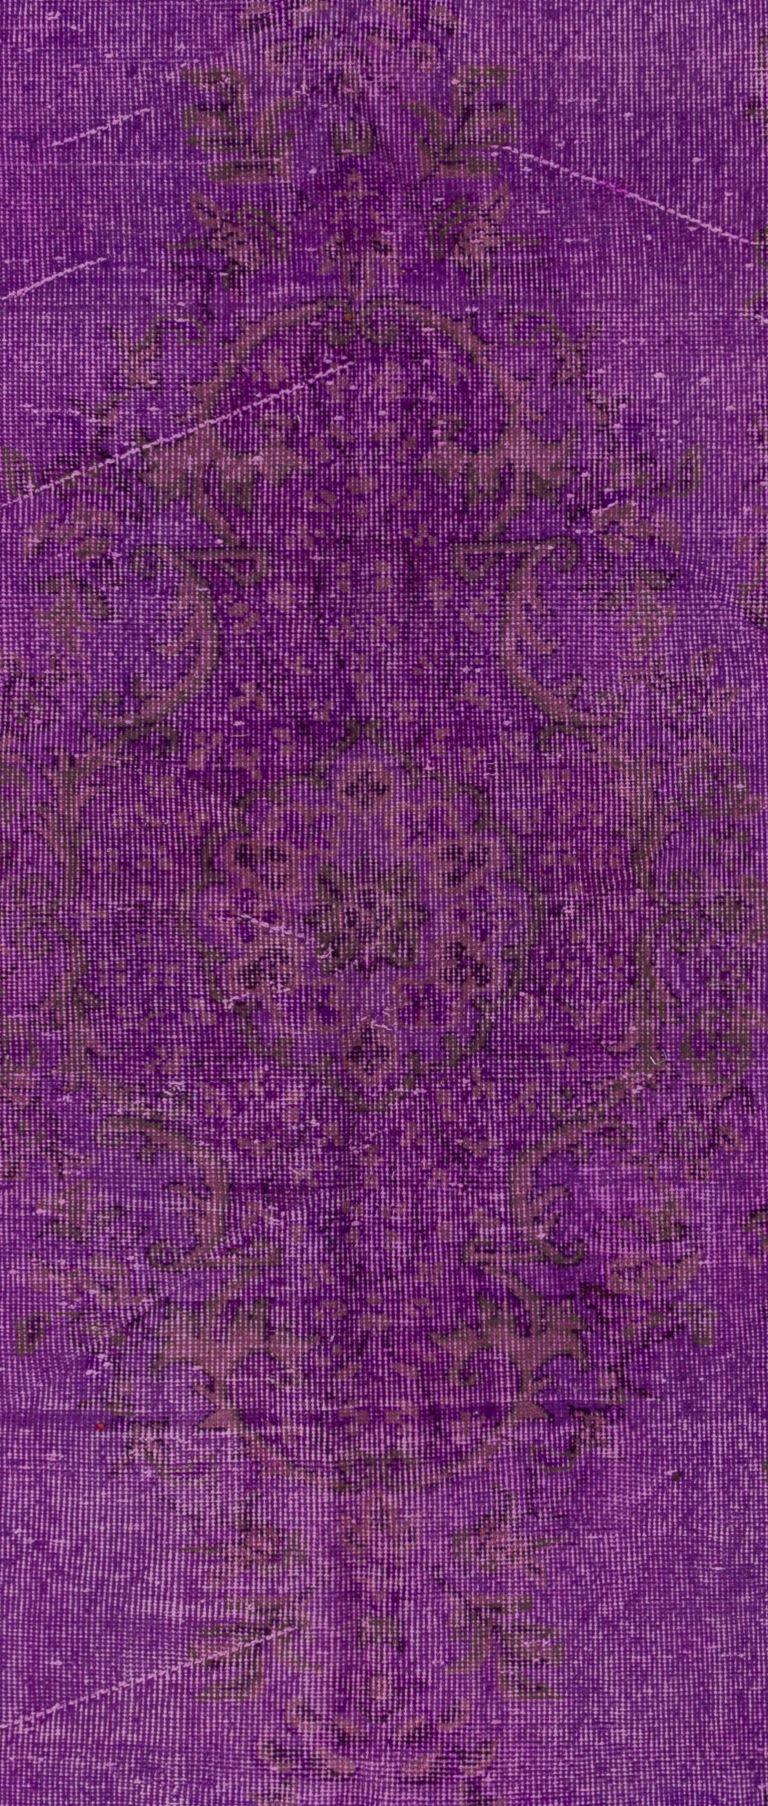 Hand-Woven 6.2x10 Ft Vintage Handmade Turkish Wool Area Rug Over-dyed in Purple